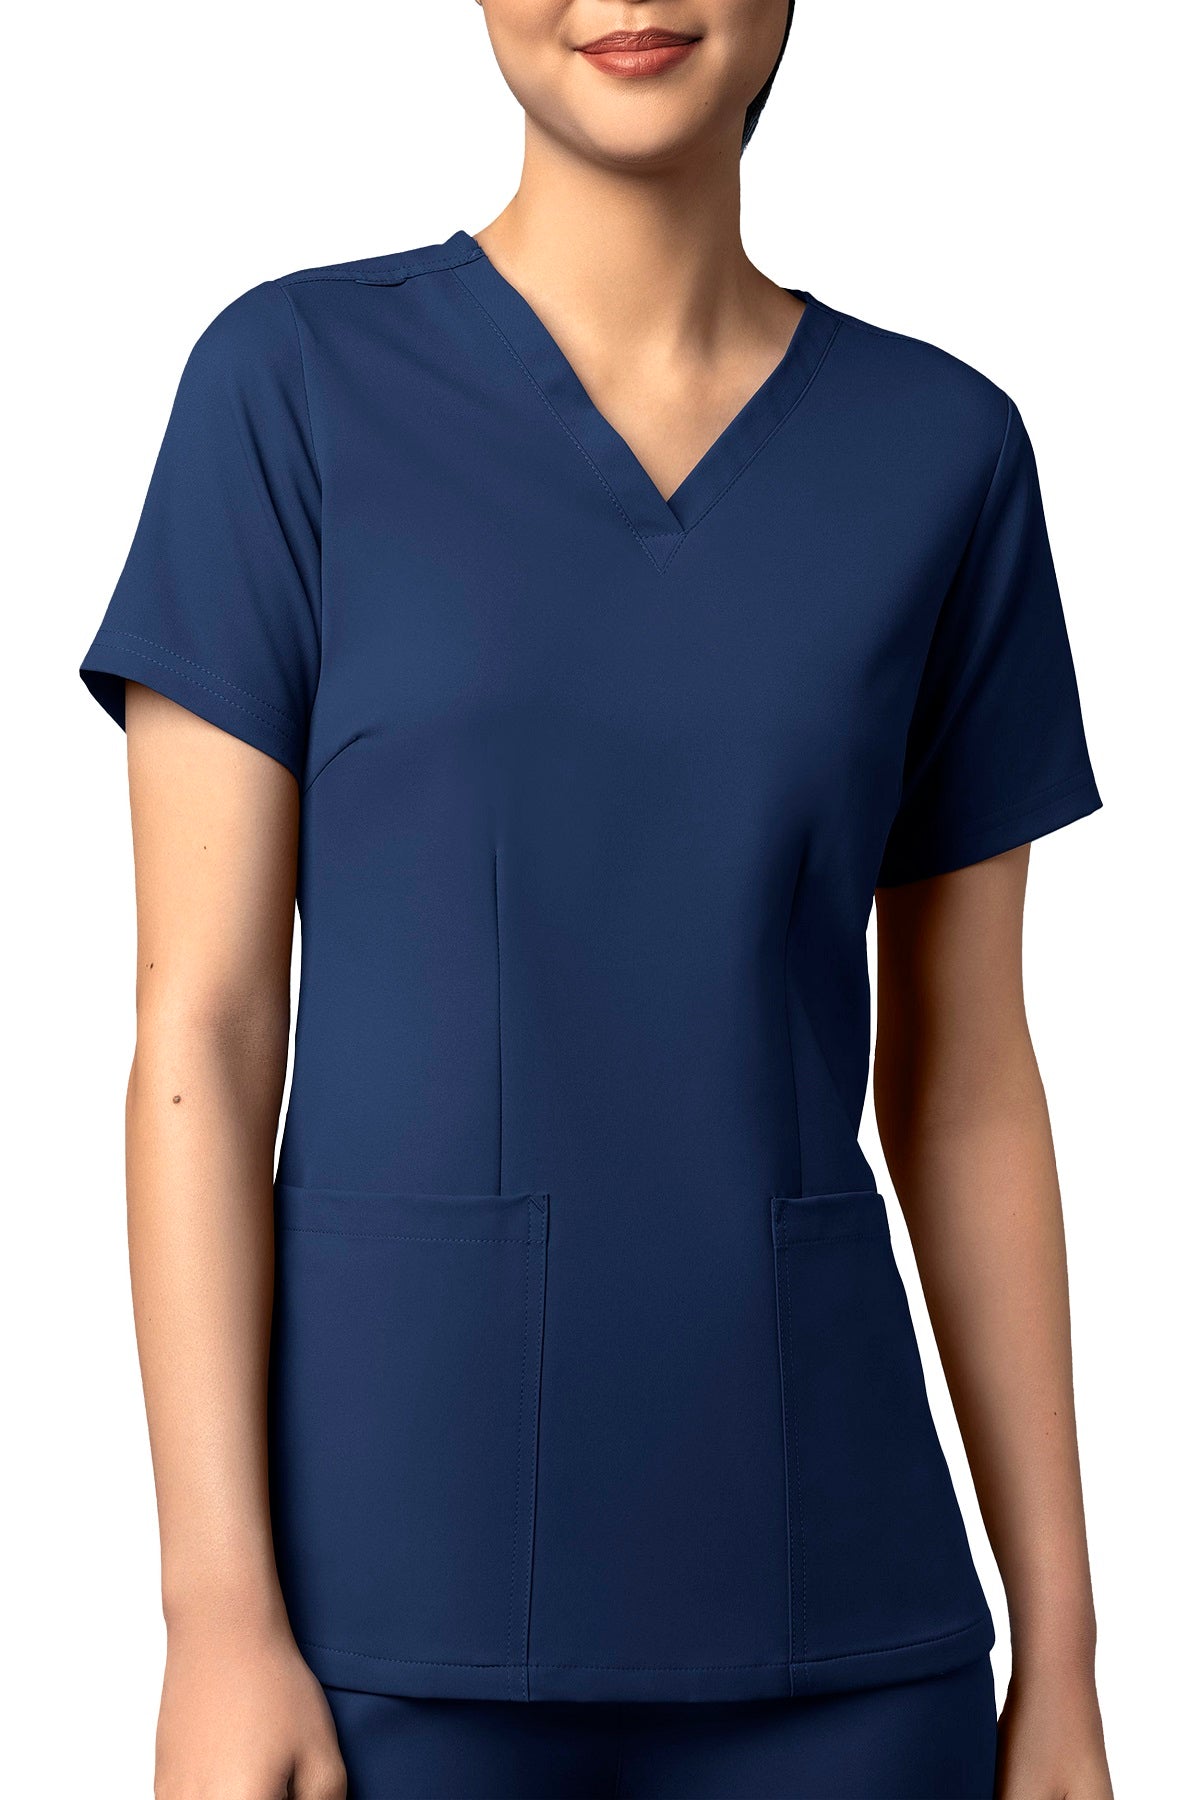 WonderWink Scrub Top Thrive Fitted 3-Pocket in navy at Parker's Clothing and Shoes.